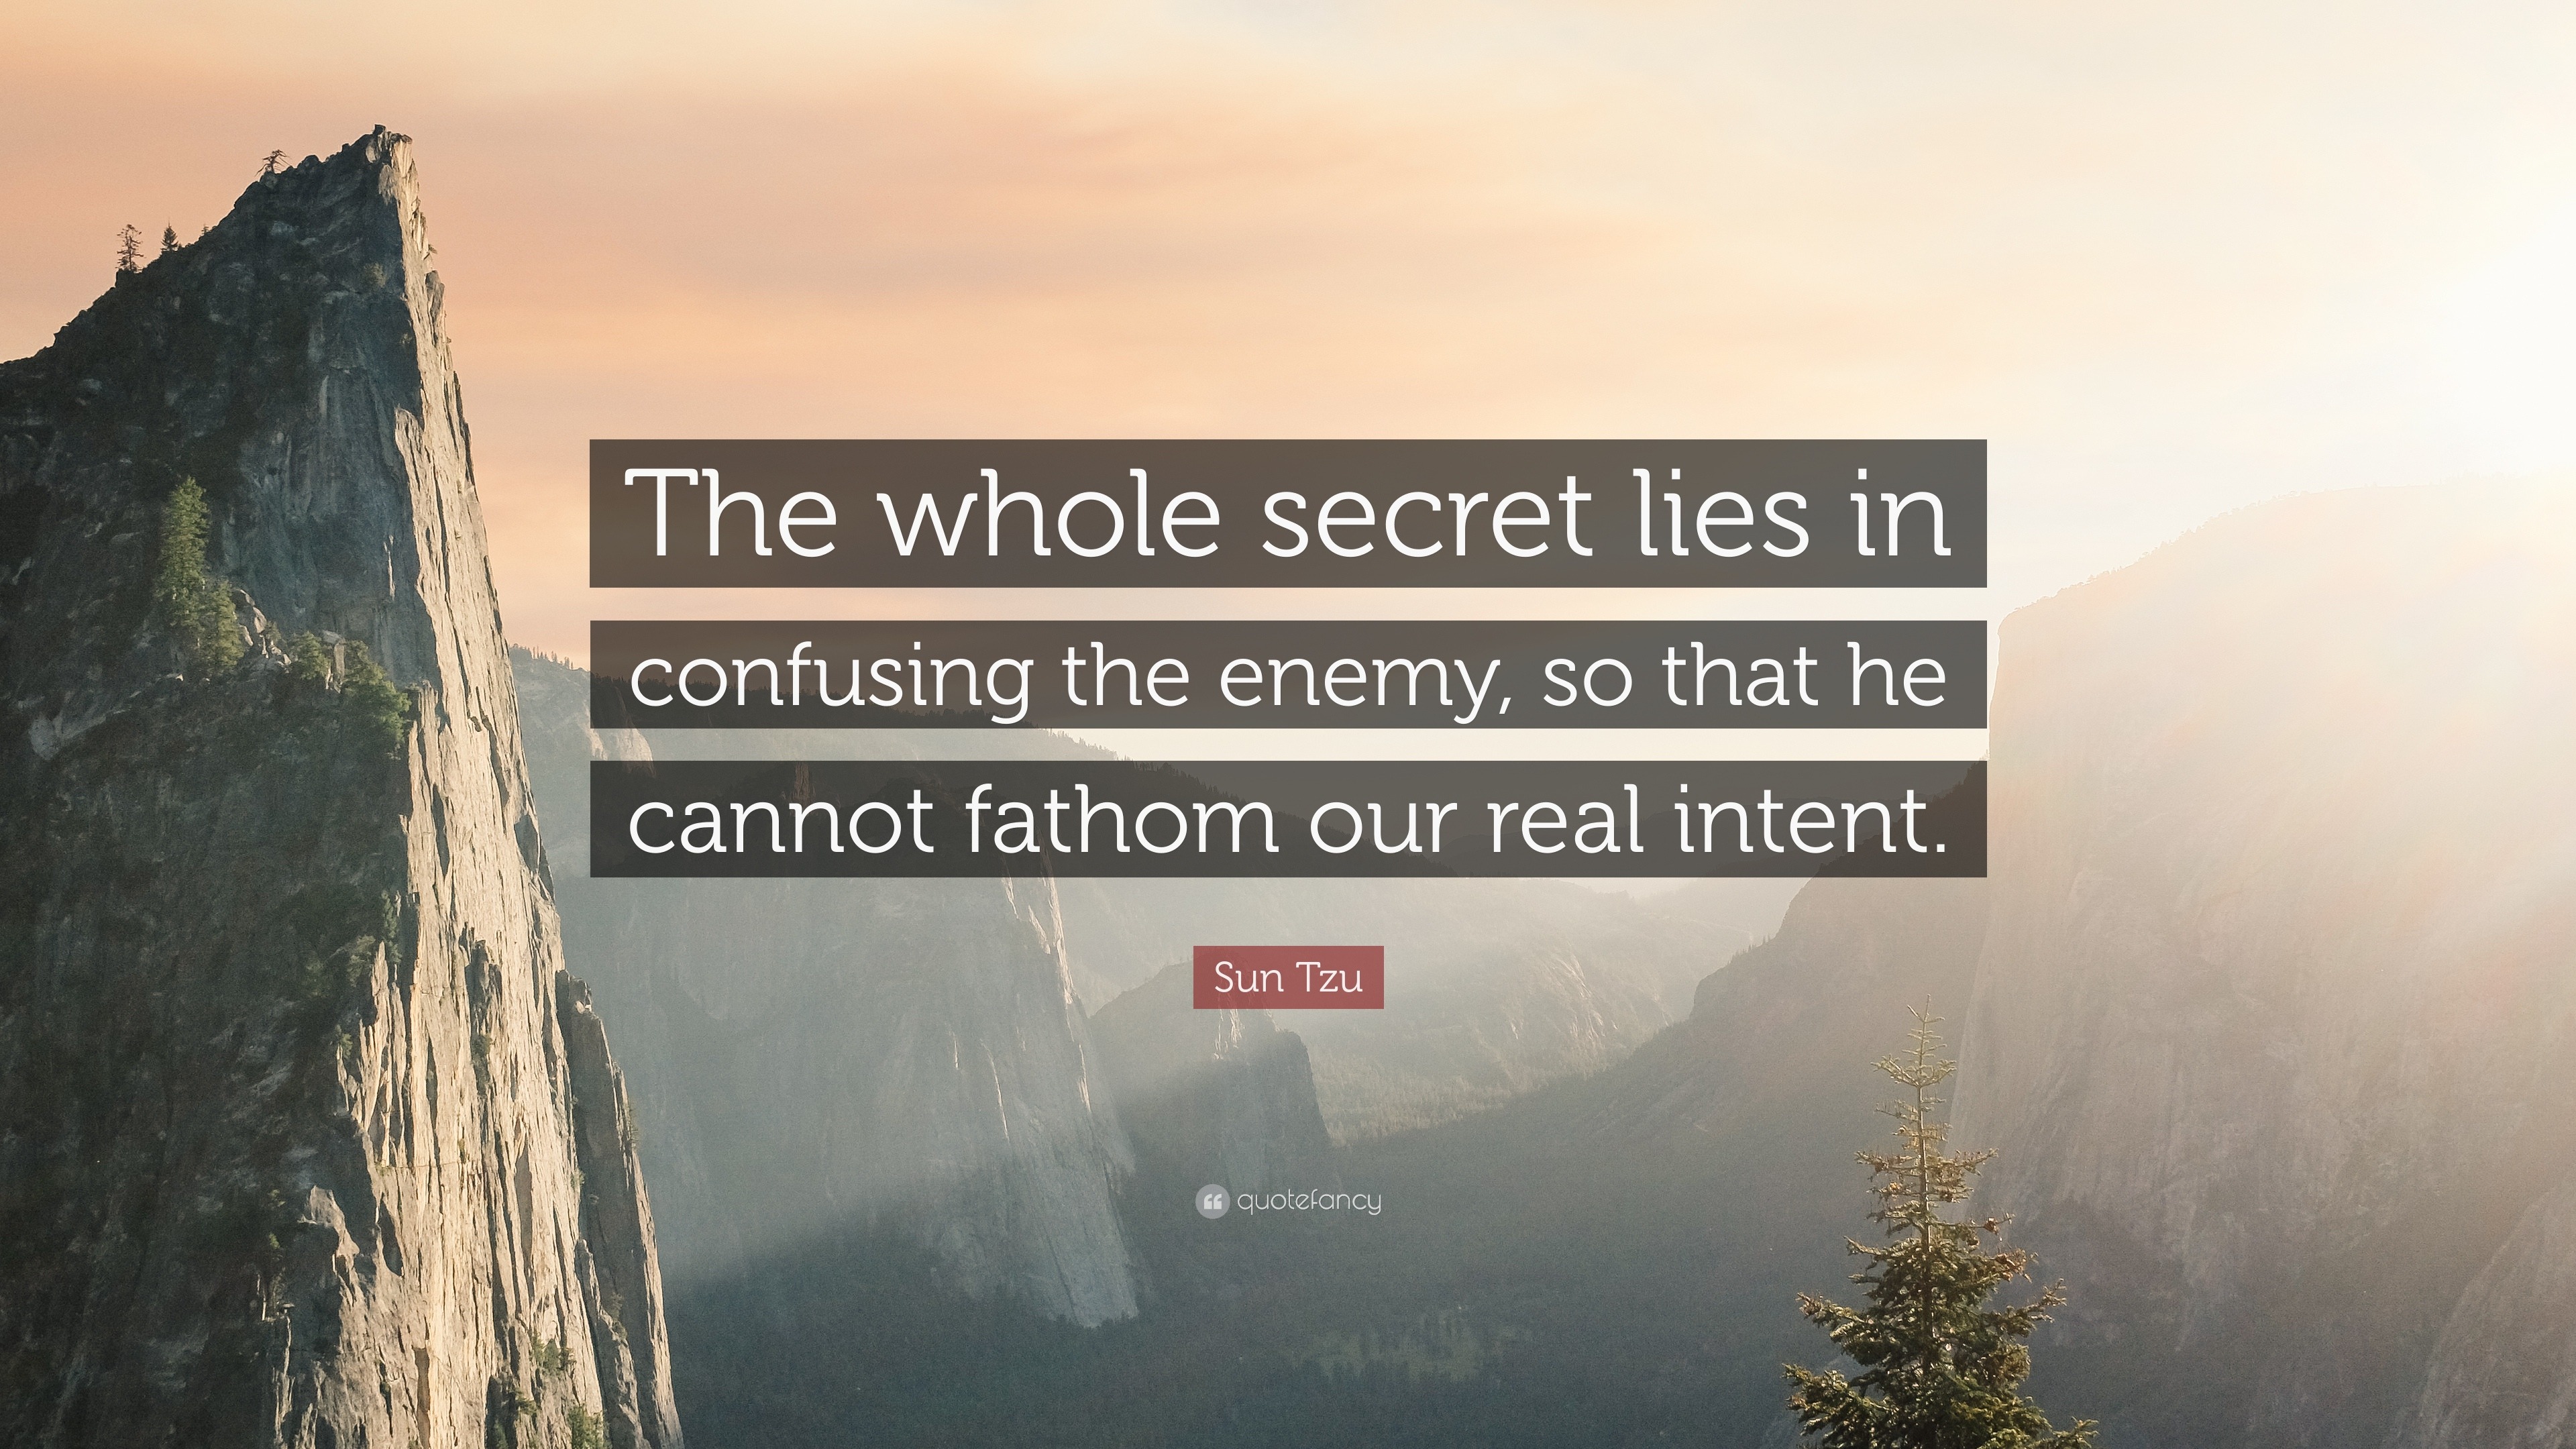 Sun Tzu Quote: “The whole secret lies in confusing the enemy, so that